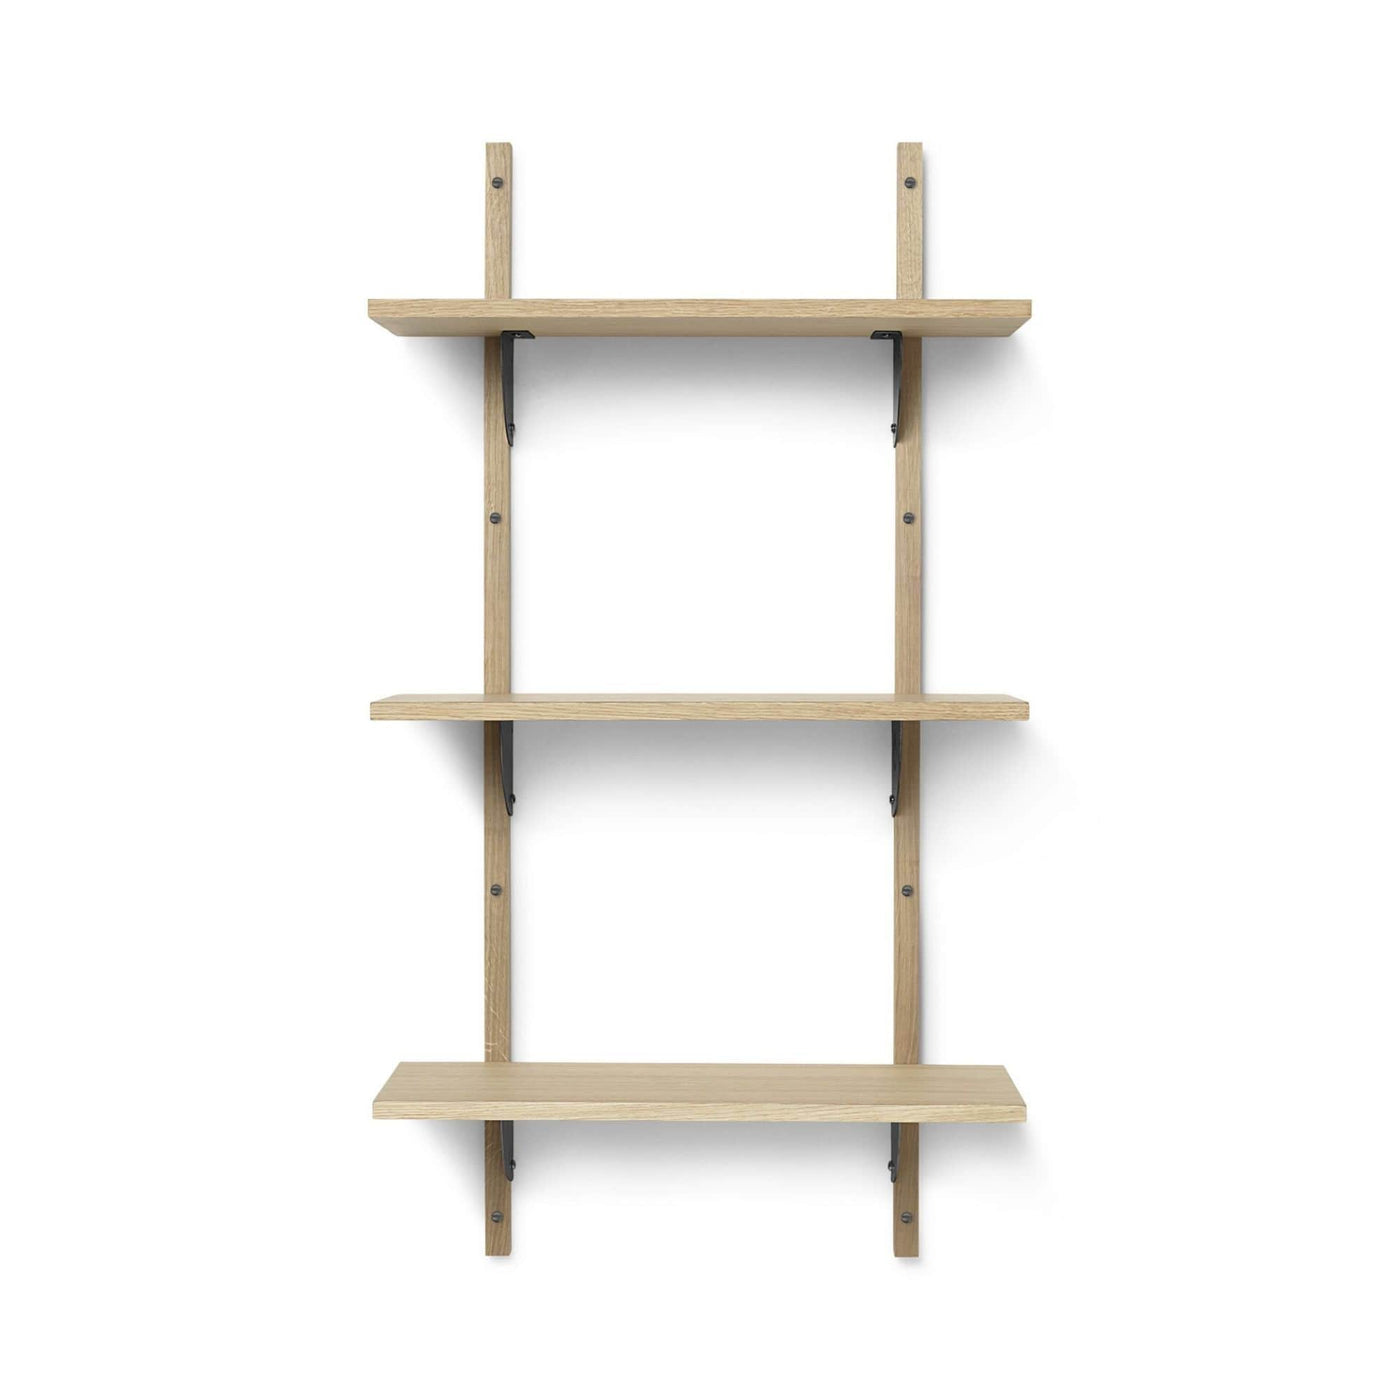 Ferm Living Sector shelf triple narrow in natural oak with blackened brass brackets. Available from someday designs. #colour_natural-oak